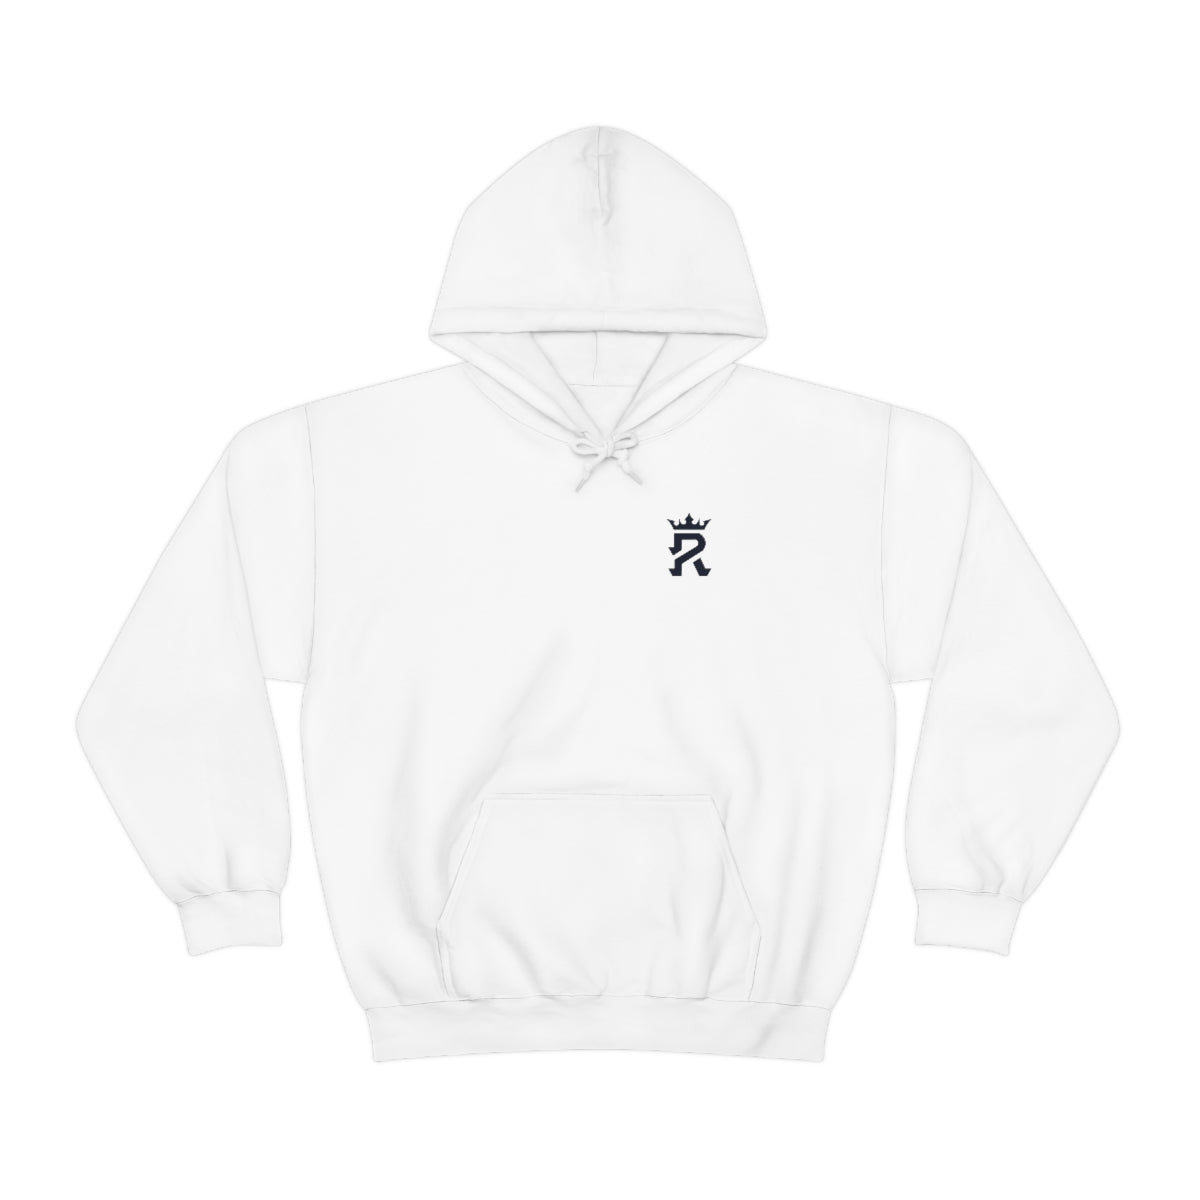 RICHIE PENA DOUBLE-SIDED HOODIE